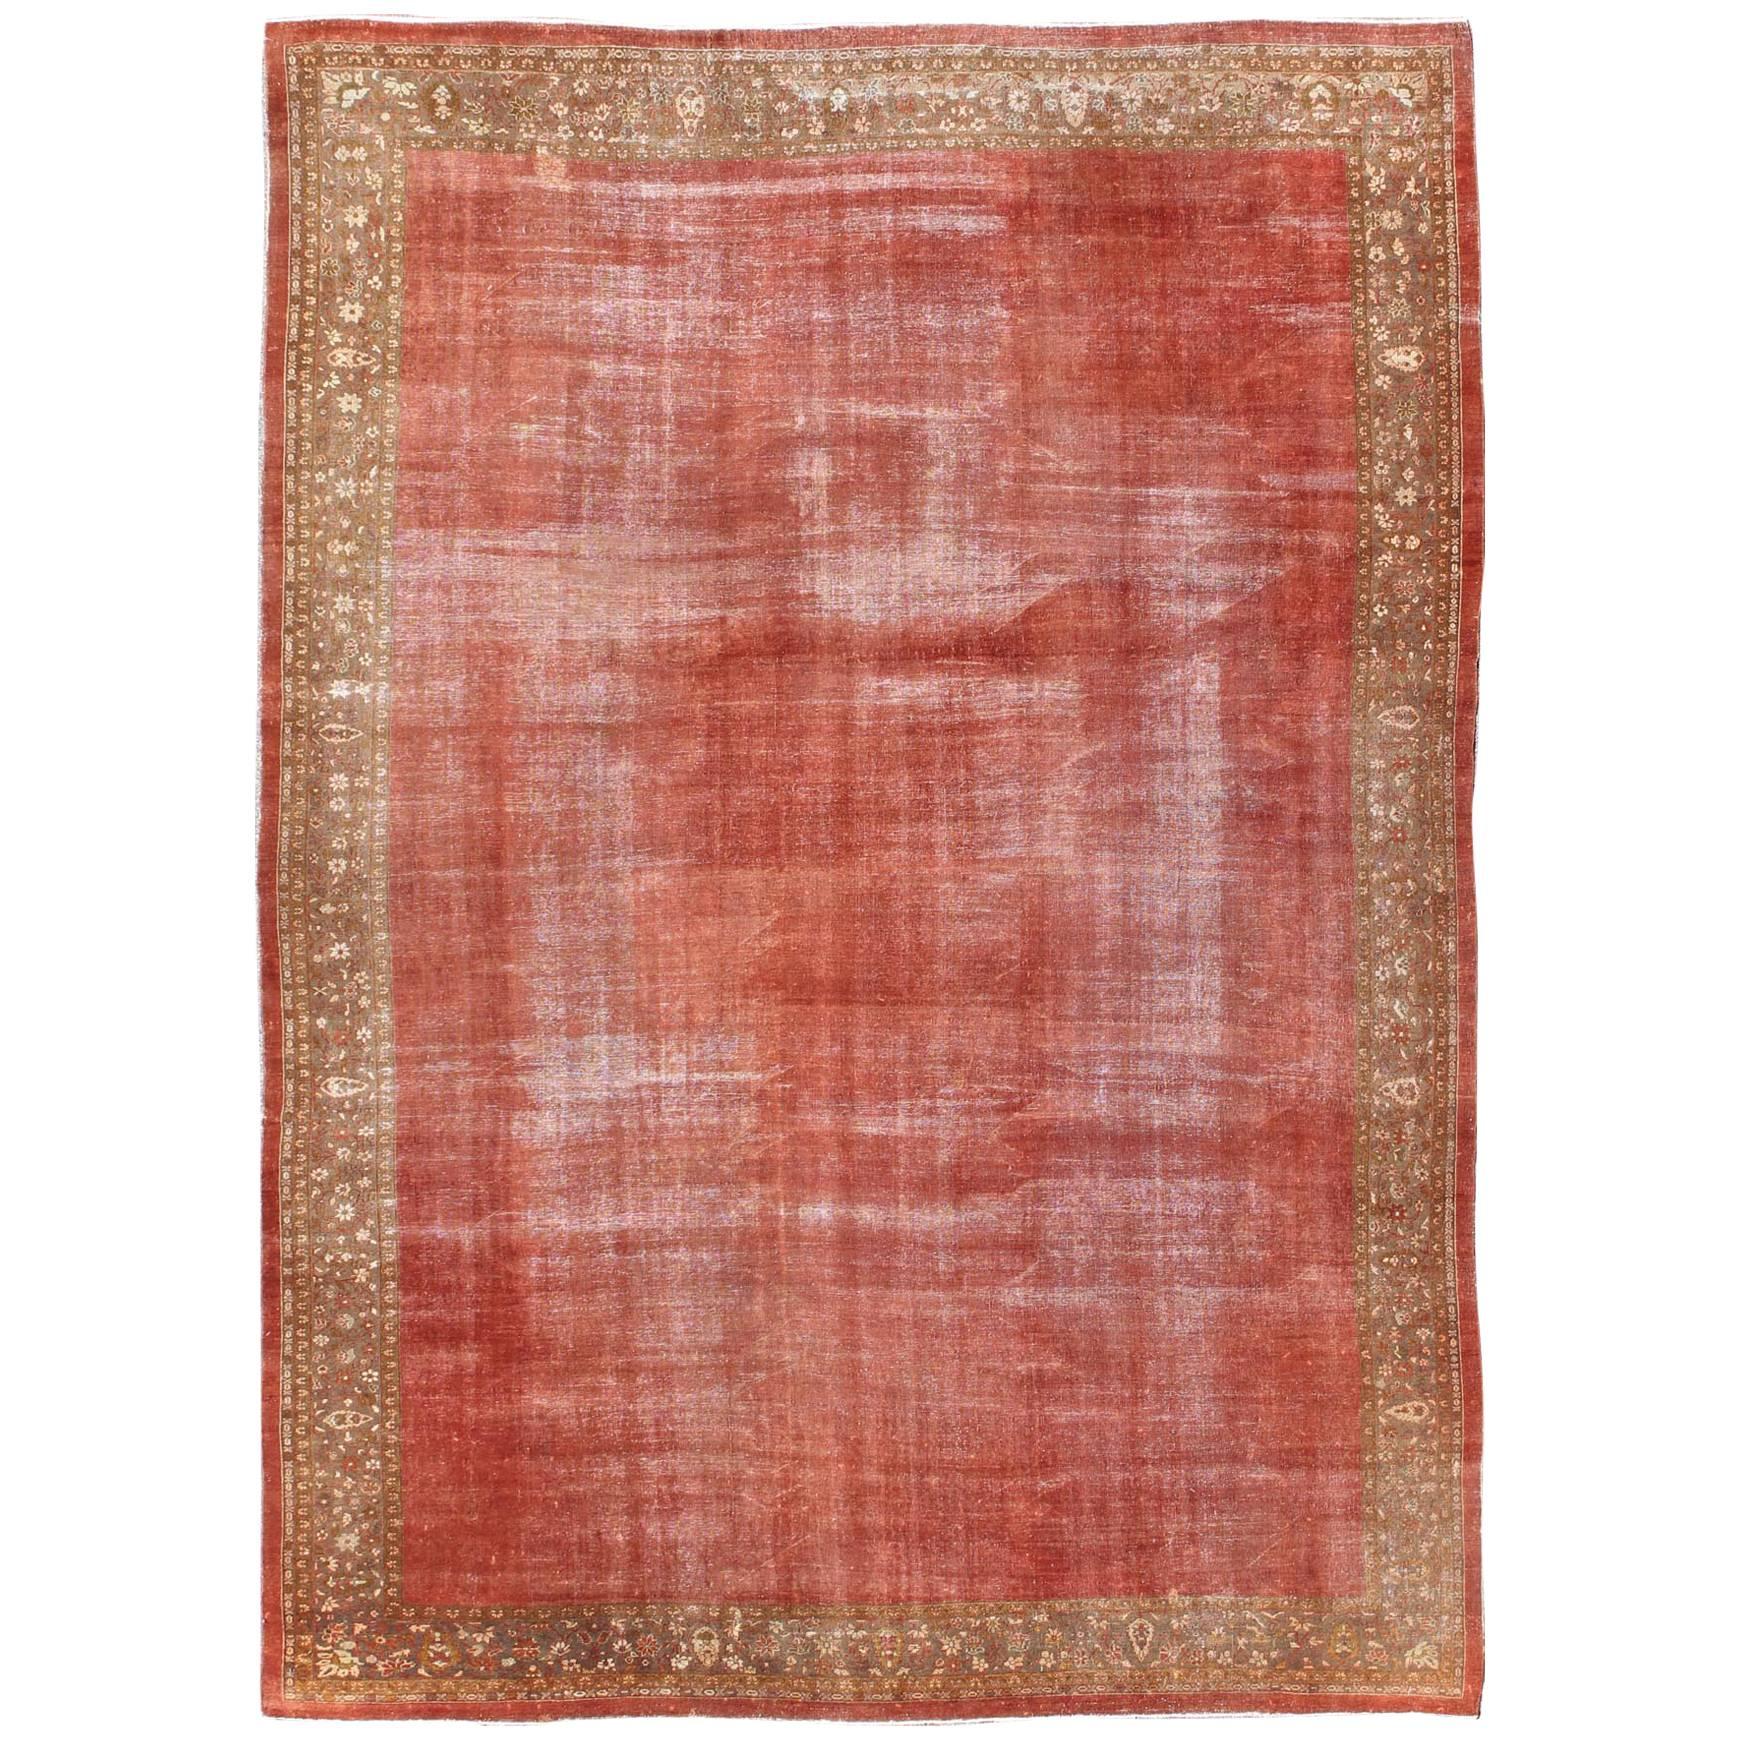 Antique Sultanabad Carpet with Open Red Field and Yellow-Green Floral Border